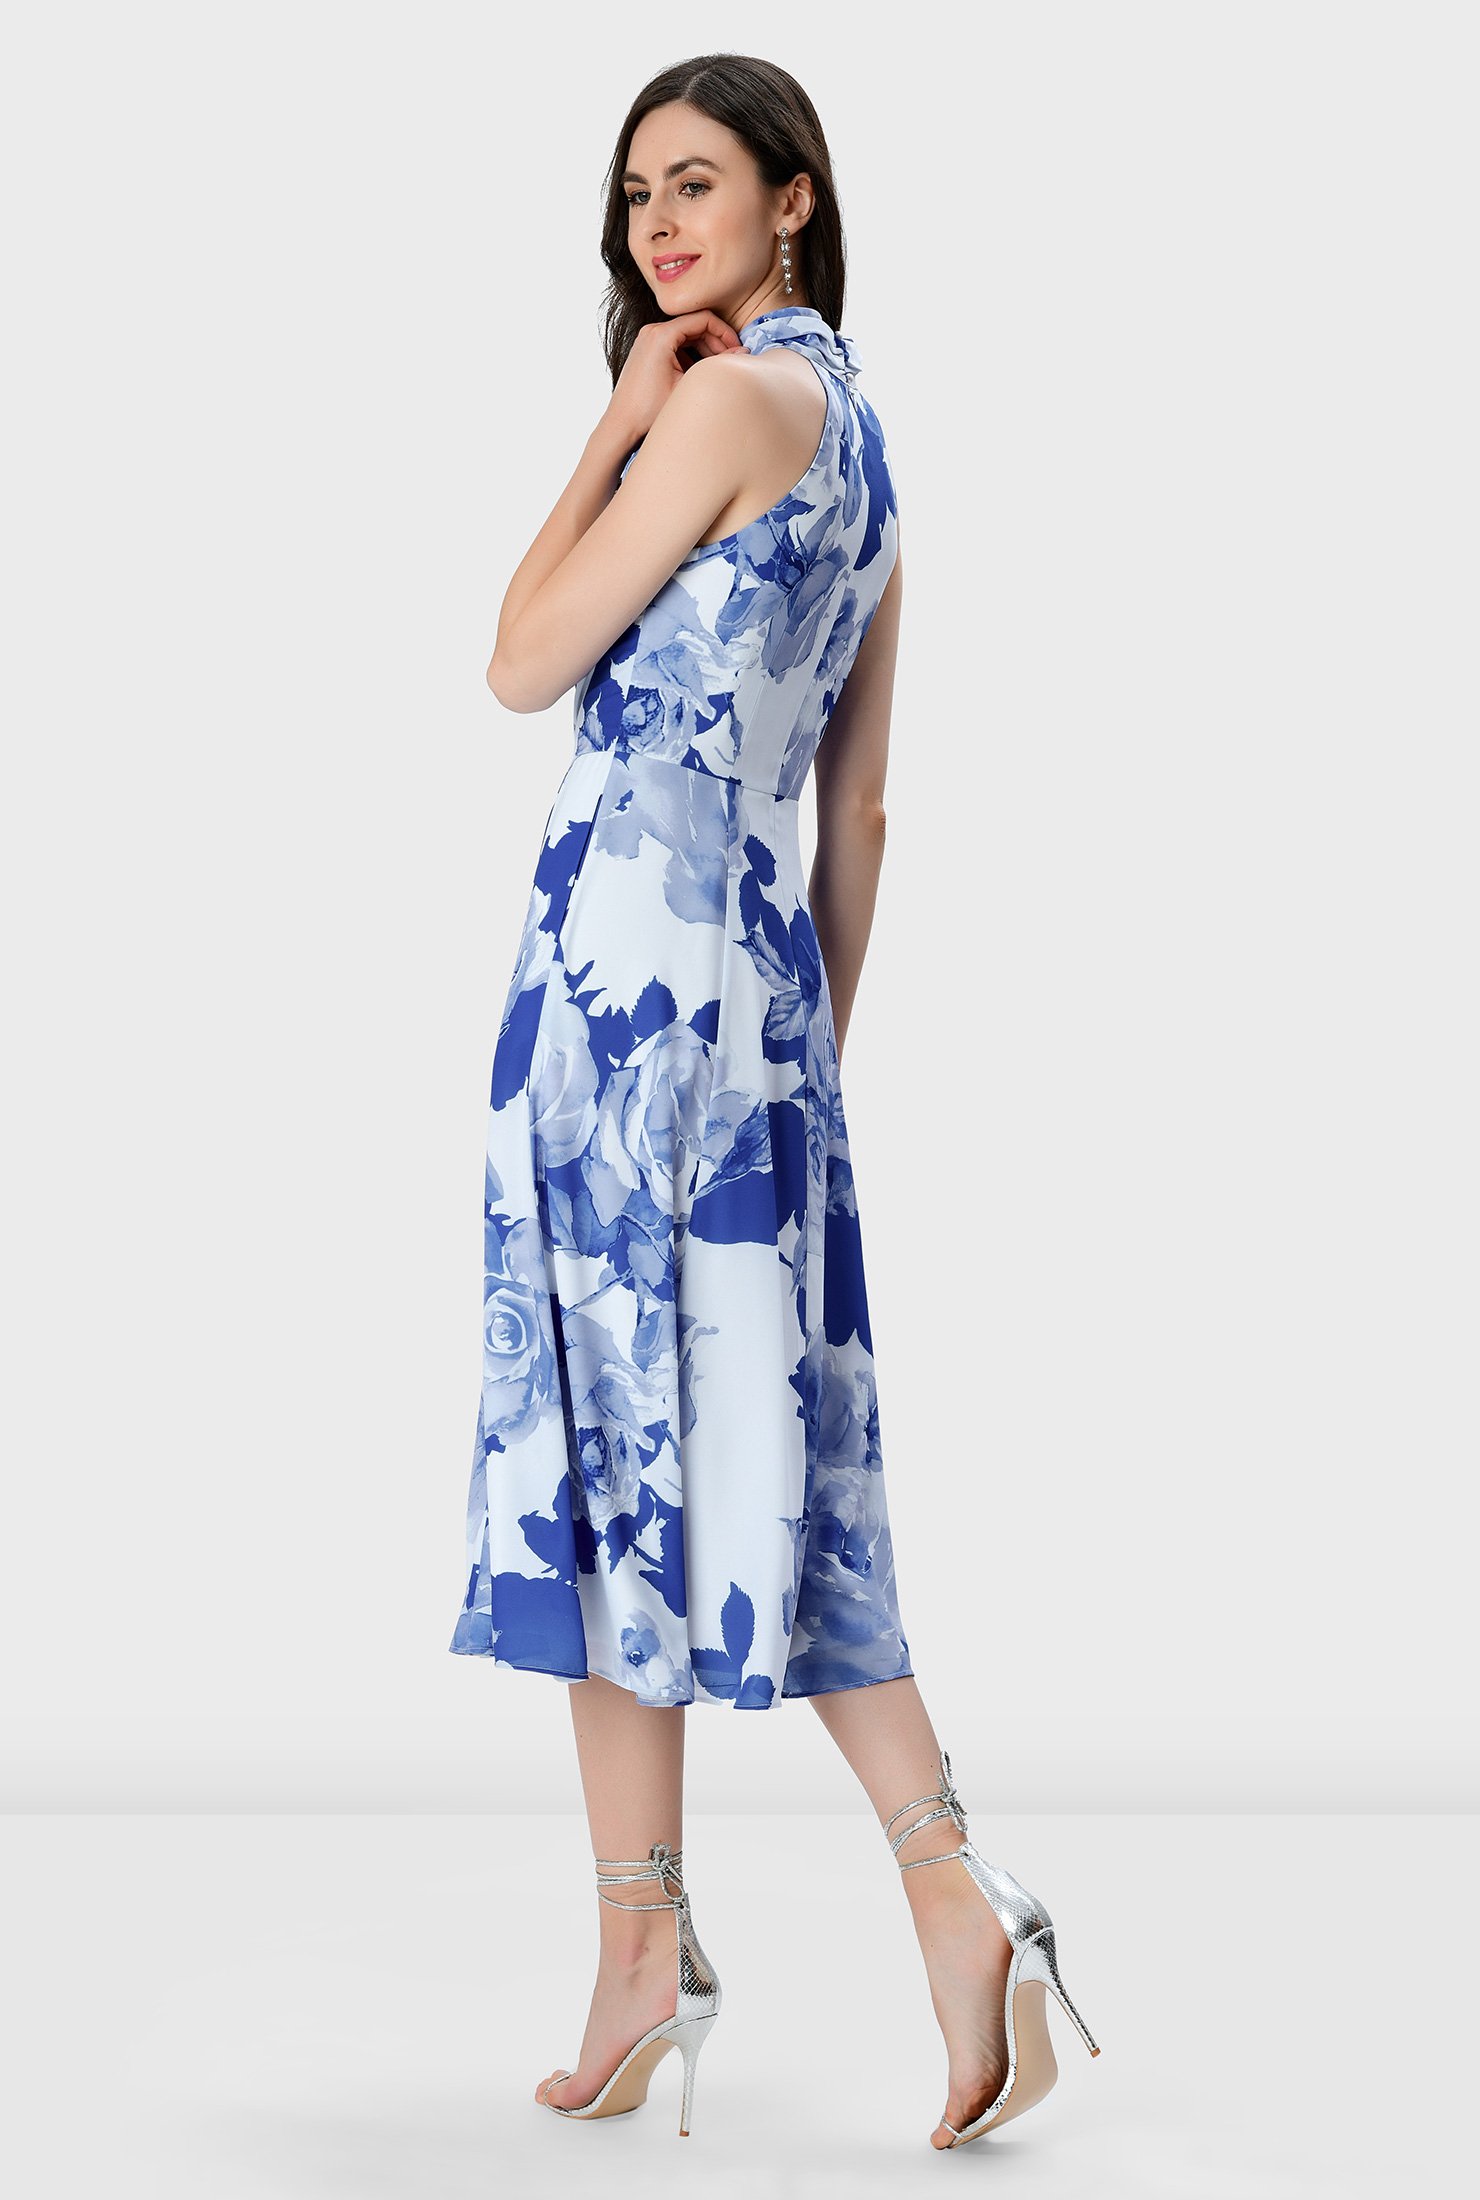 Fresh air favorite! Feel the breeze and the sun on your shoulders in our watercolor rose print crepe dress with a halter neck and a criss-cross front atop a full flare skirt that makes it a perfect choice for an unforgettable party.